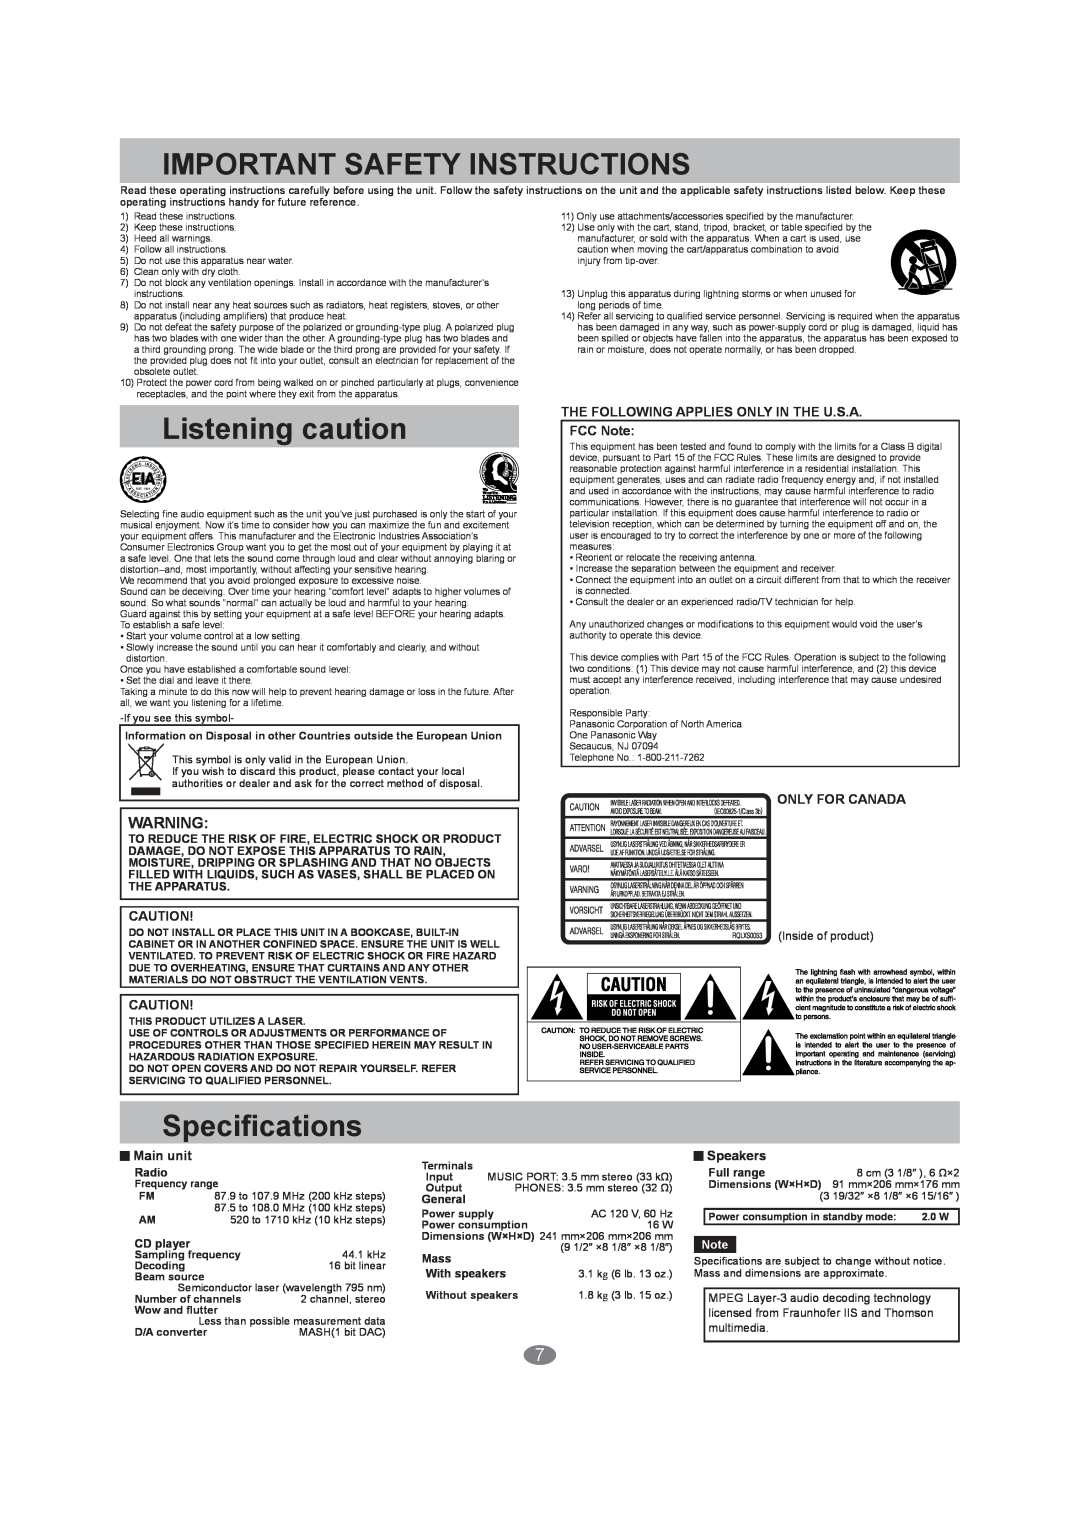 Panasonic SC-EN25 Important Safety Instructions, Listening caution, Speciﬁcations, Only For Canada, Main unit, Speakers 